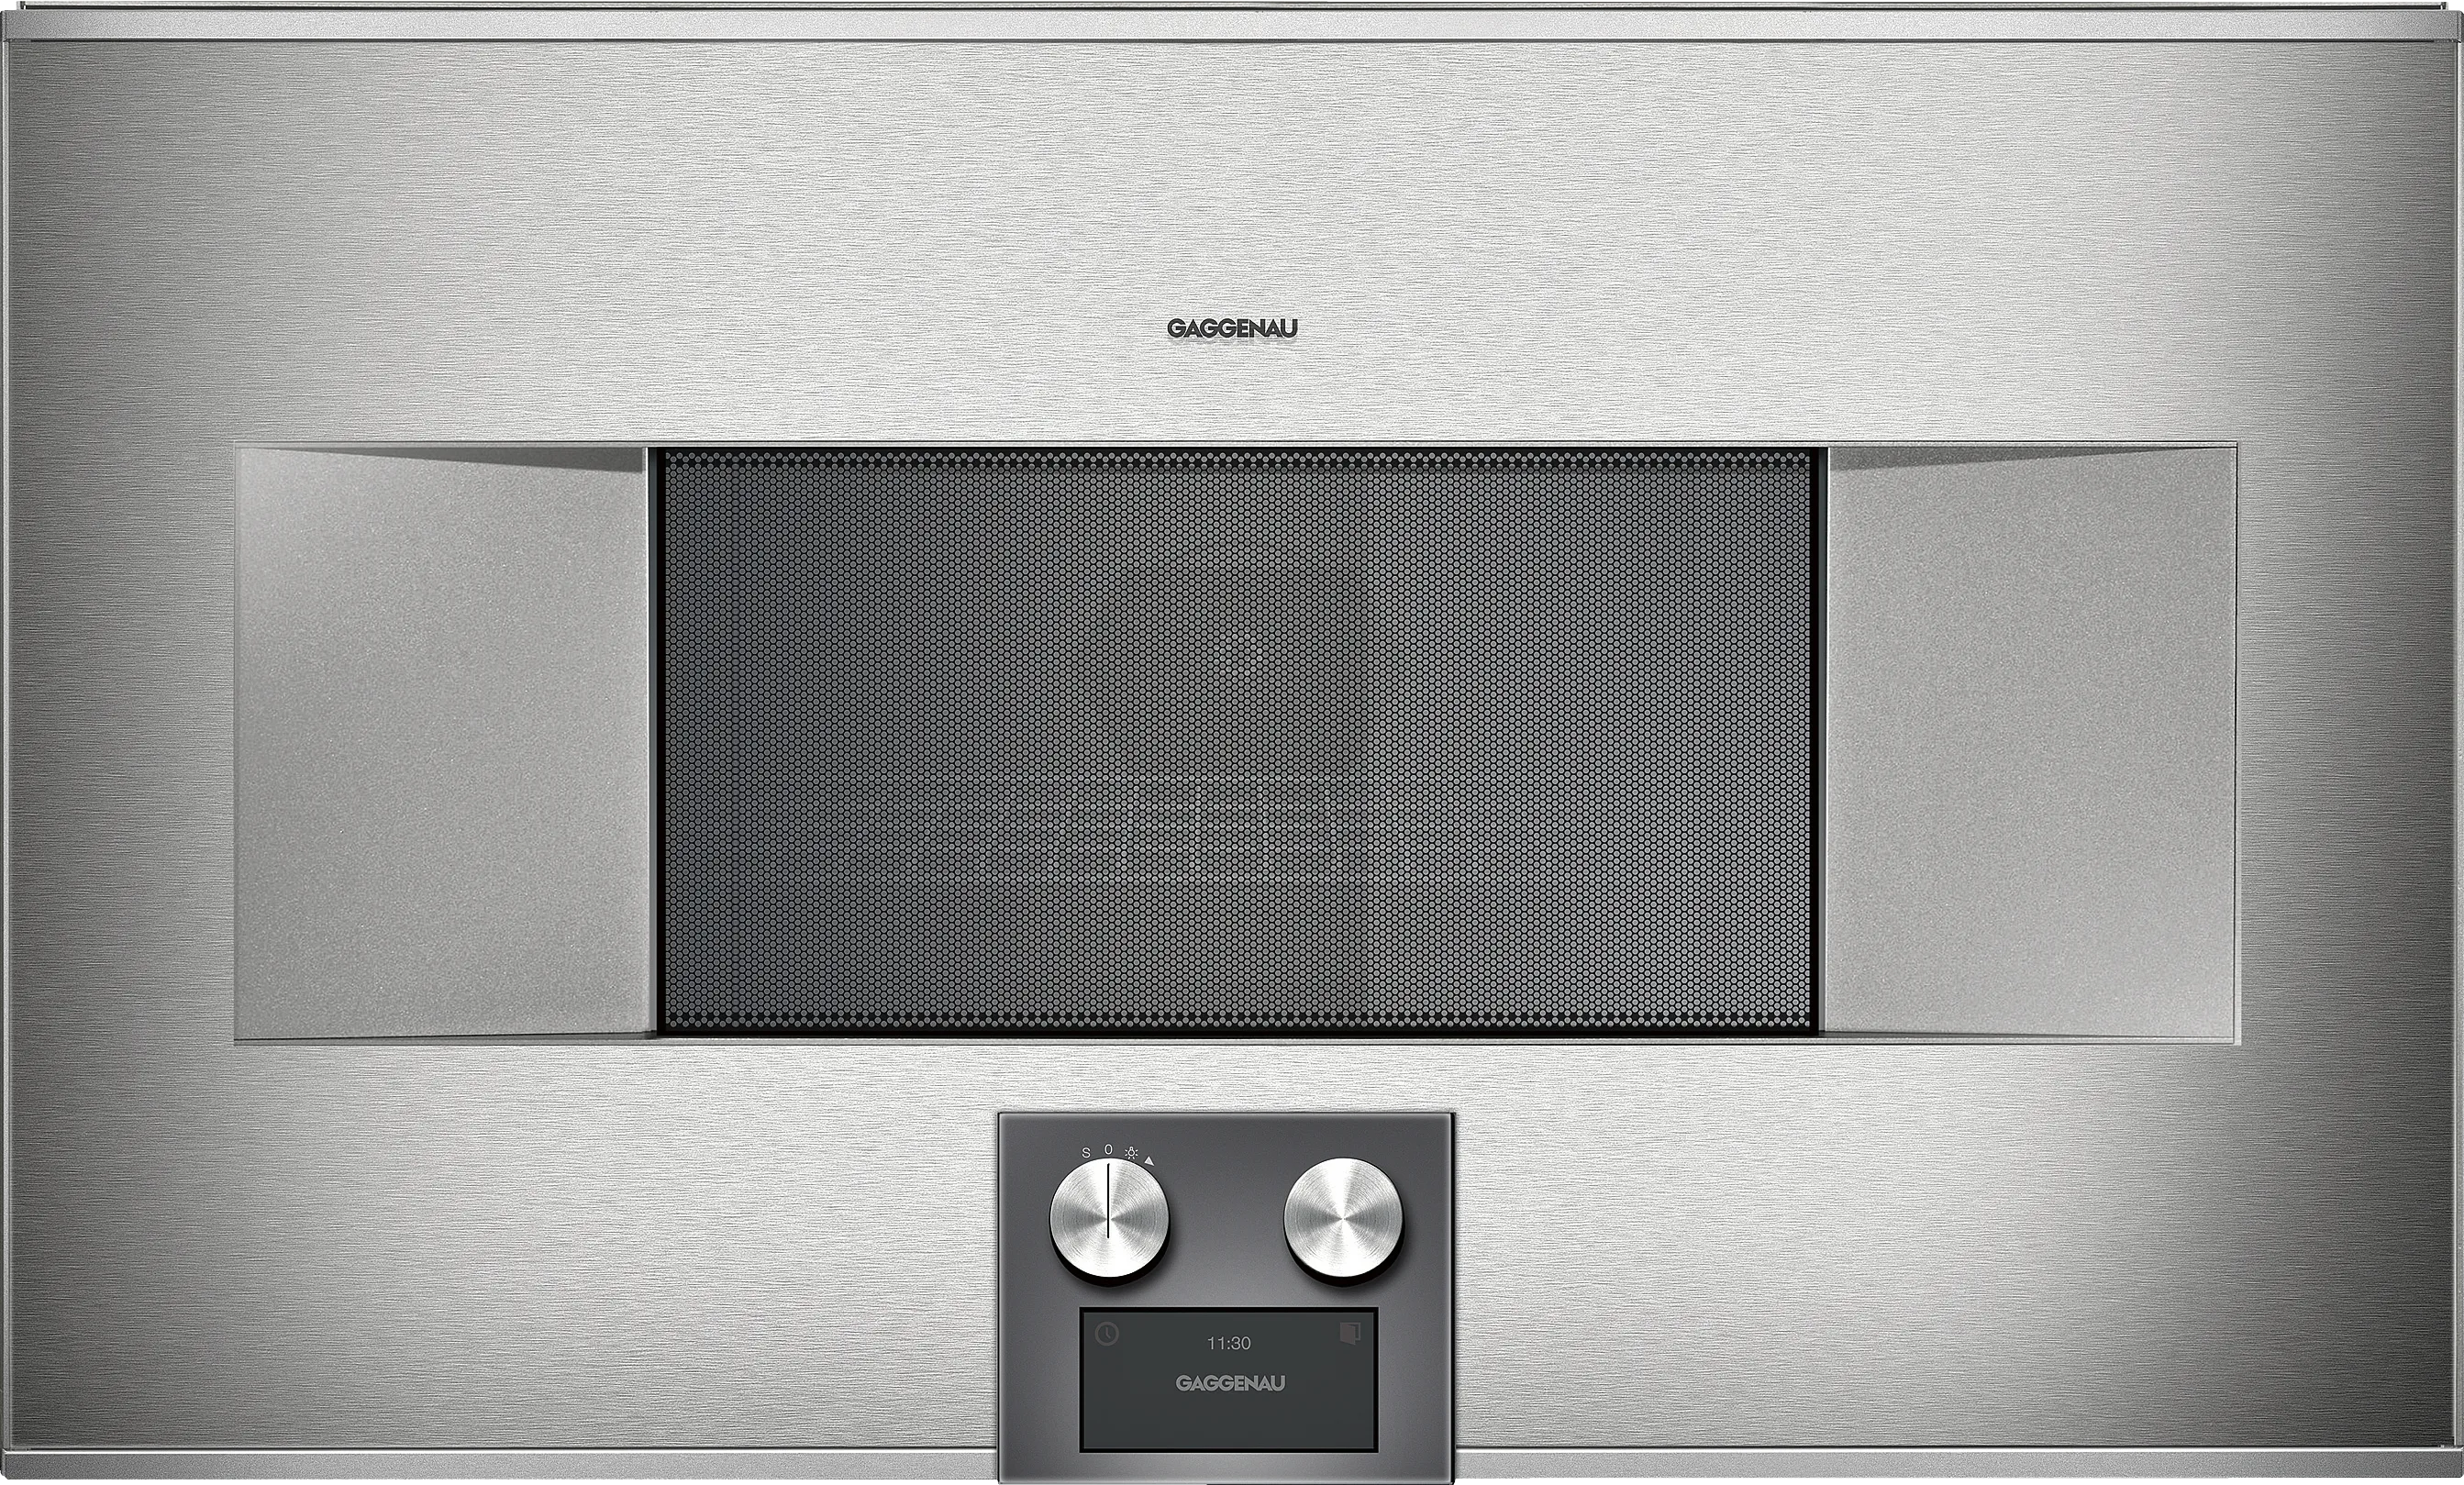 400 series built-in compact oven with microwave function 76 x 45 cm Door hinge: Right, Stainless steel behind glass 